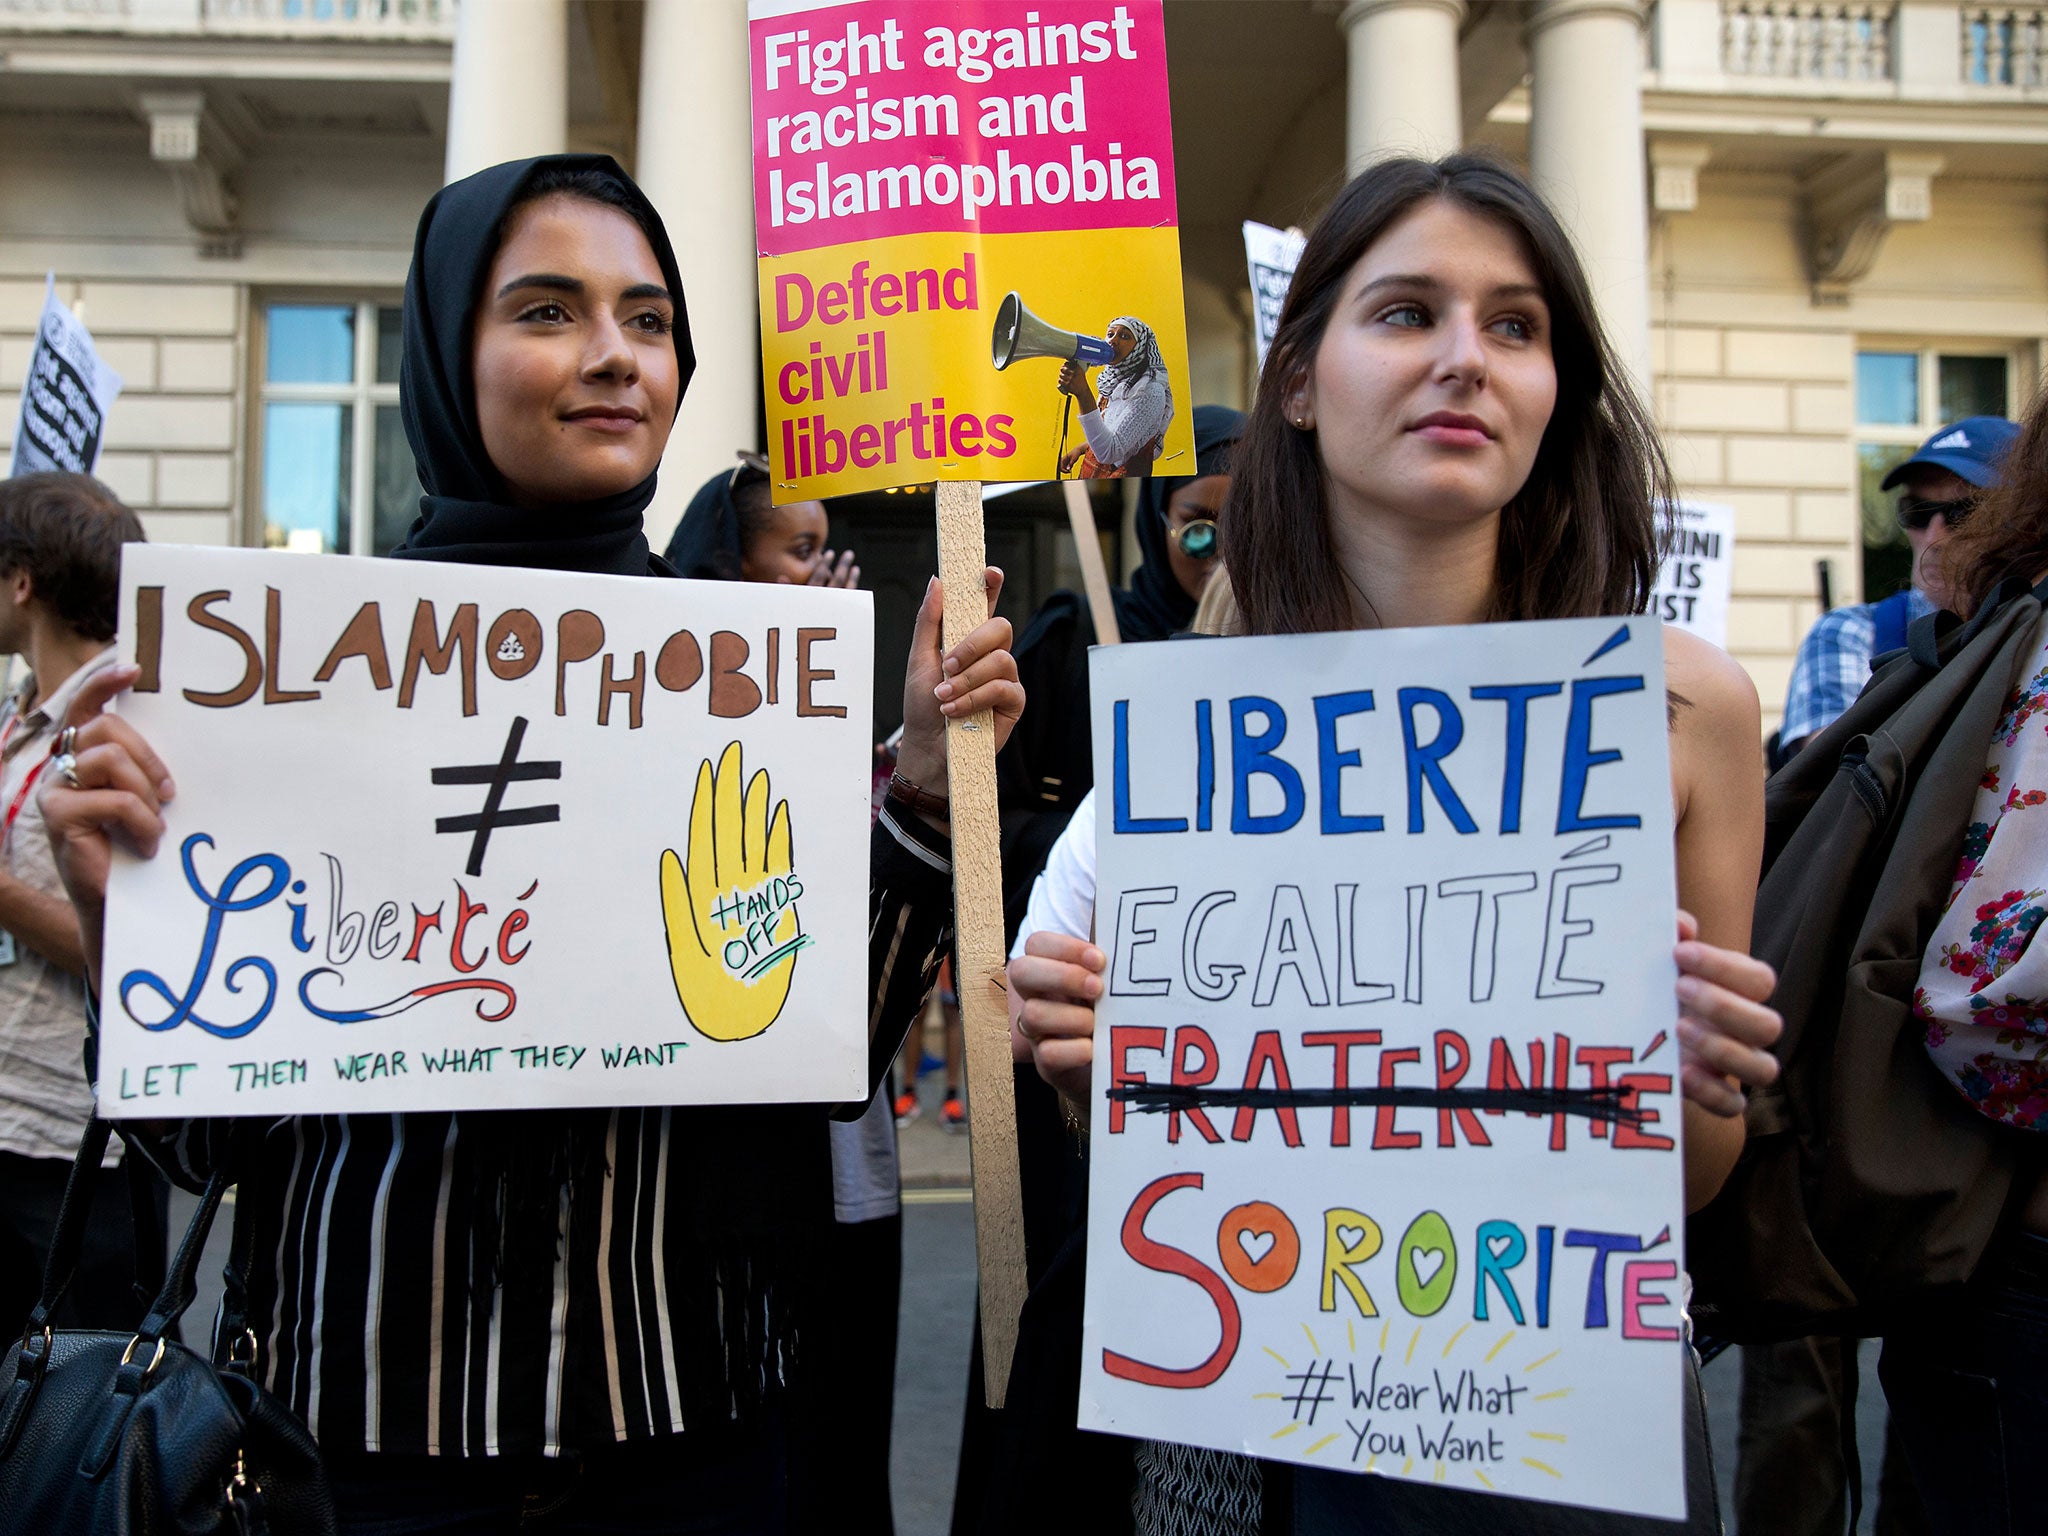 Women join a demonstration organised by 'Stand up to Racism' outside the French Embassy in London on August 26, against the Burkini ban on French beaches